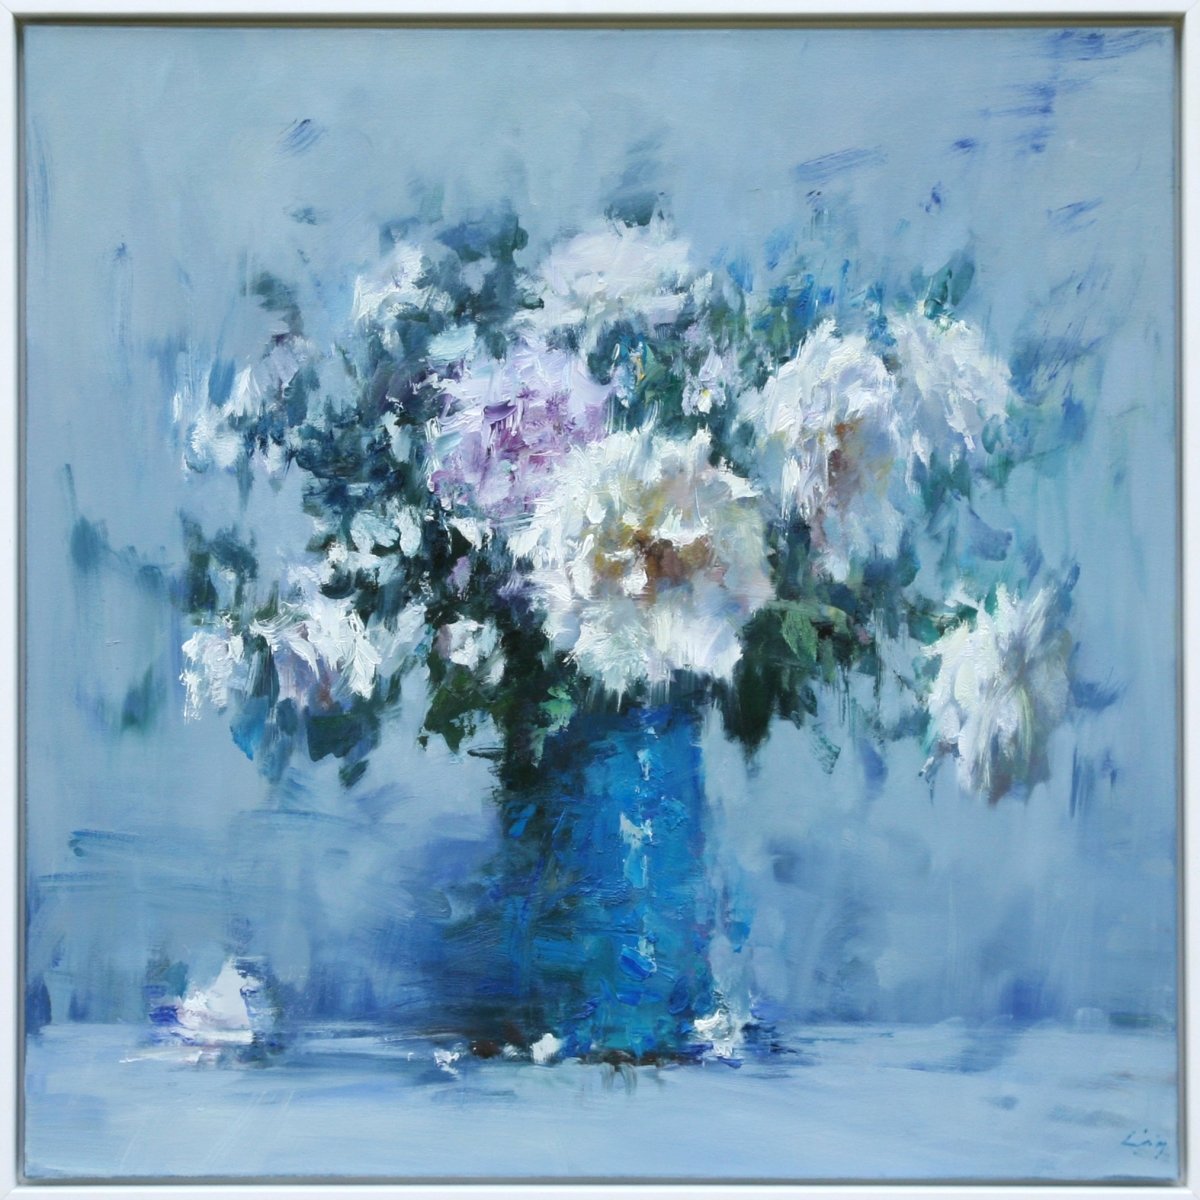 White & Blue by Ning Lee at LePrince Galleries